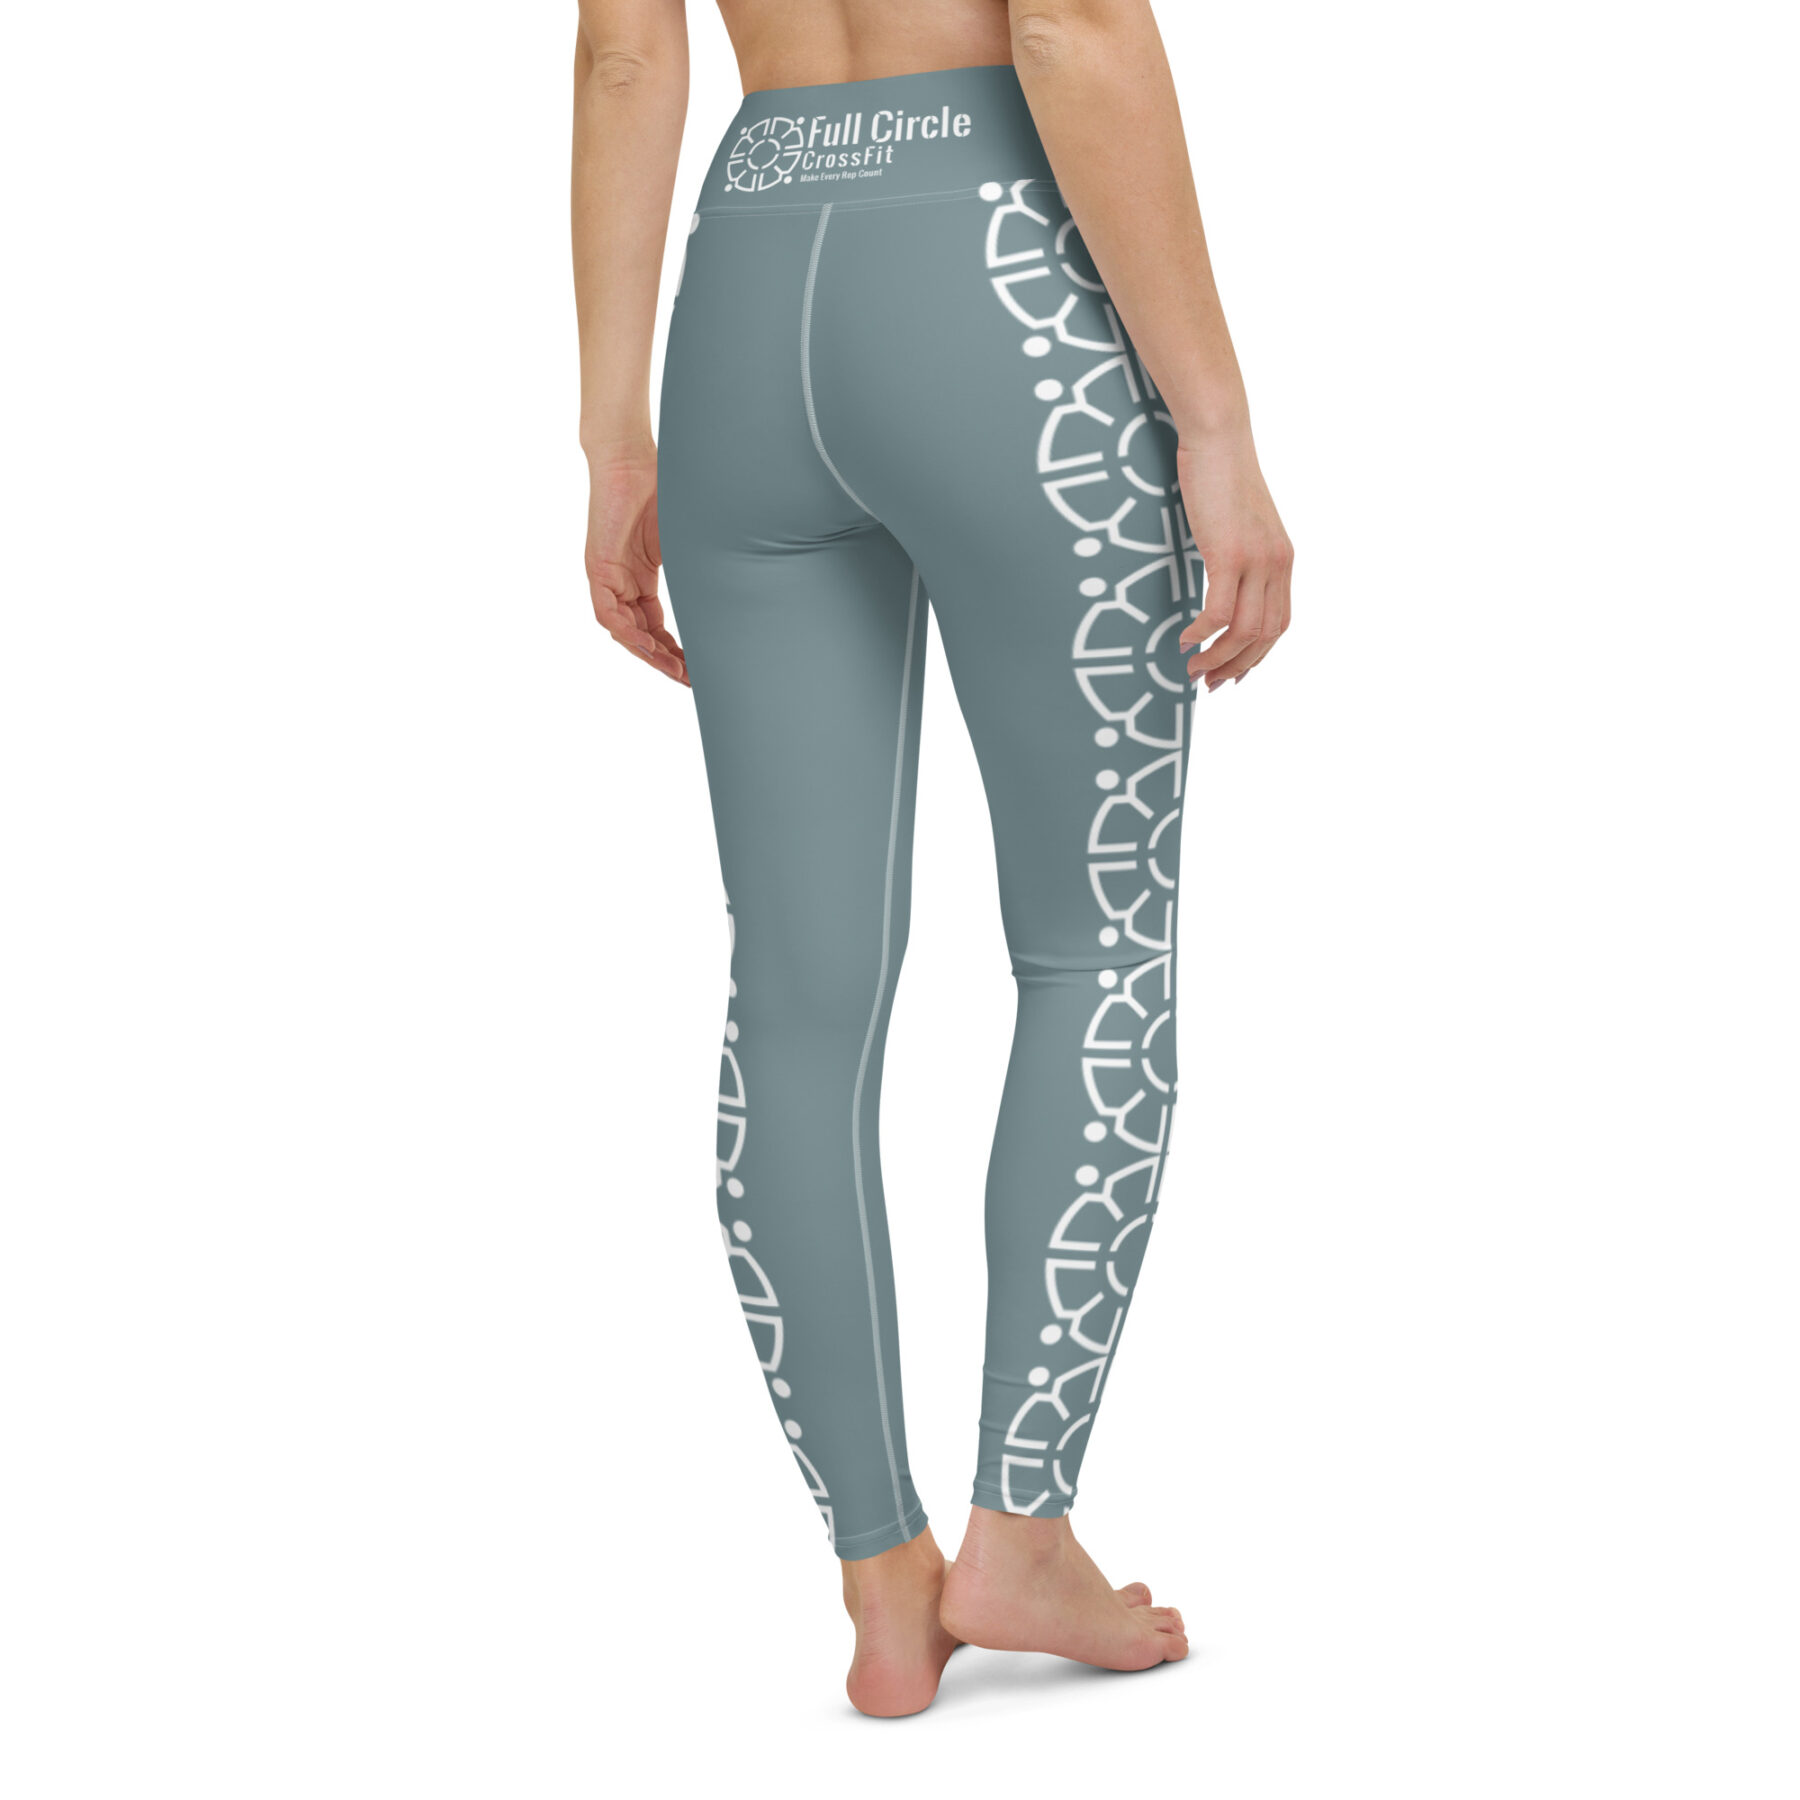 High Waist Slim Fit Crossfit Leggings And Pants Set With Push Up Effect  Sexy Two Piece Design For Womens Workout And Leisure X0629 From Musuo03,  $13.93 | DHgate.Com